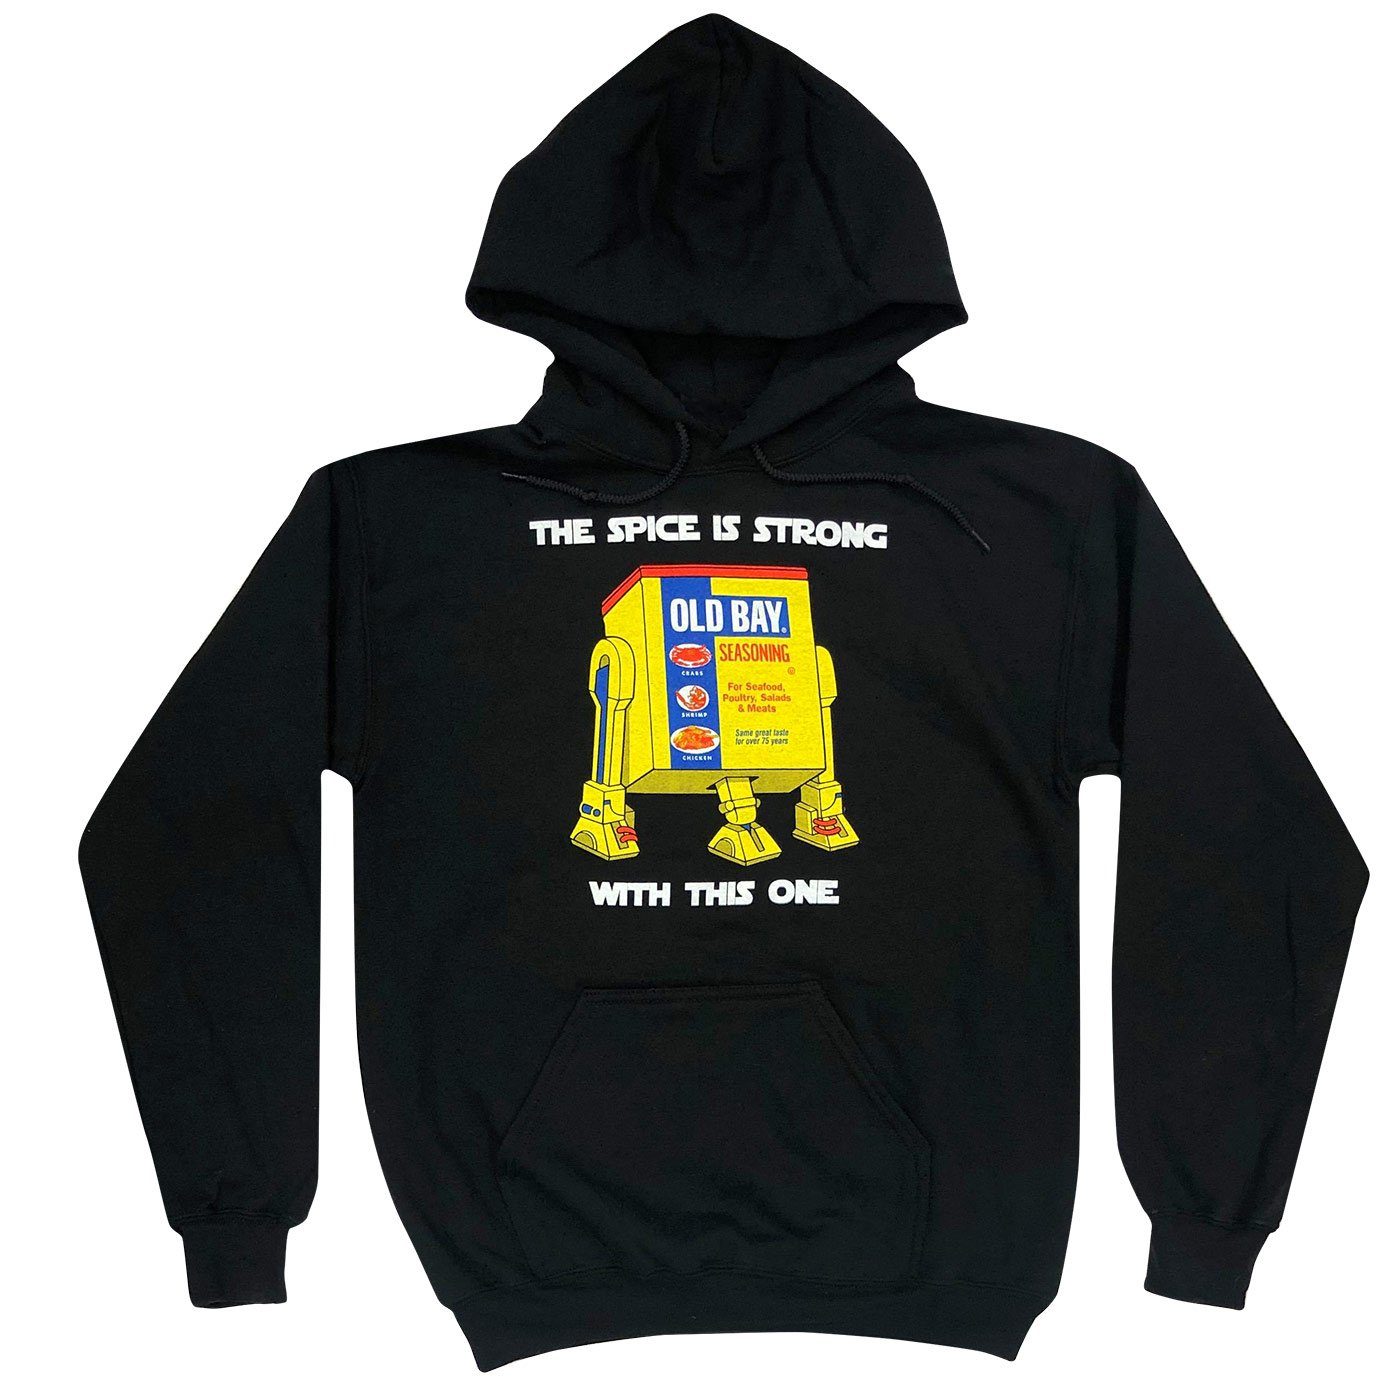 The Spice Is Strong With This One (Black) / Hoodie - Route One Apparel